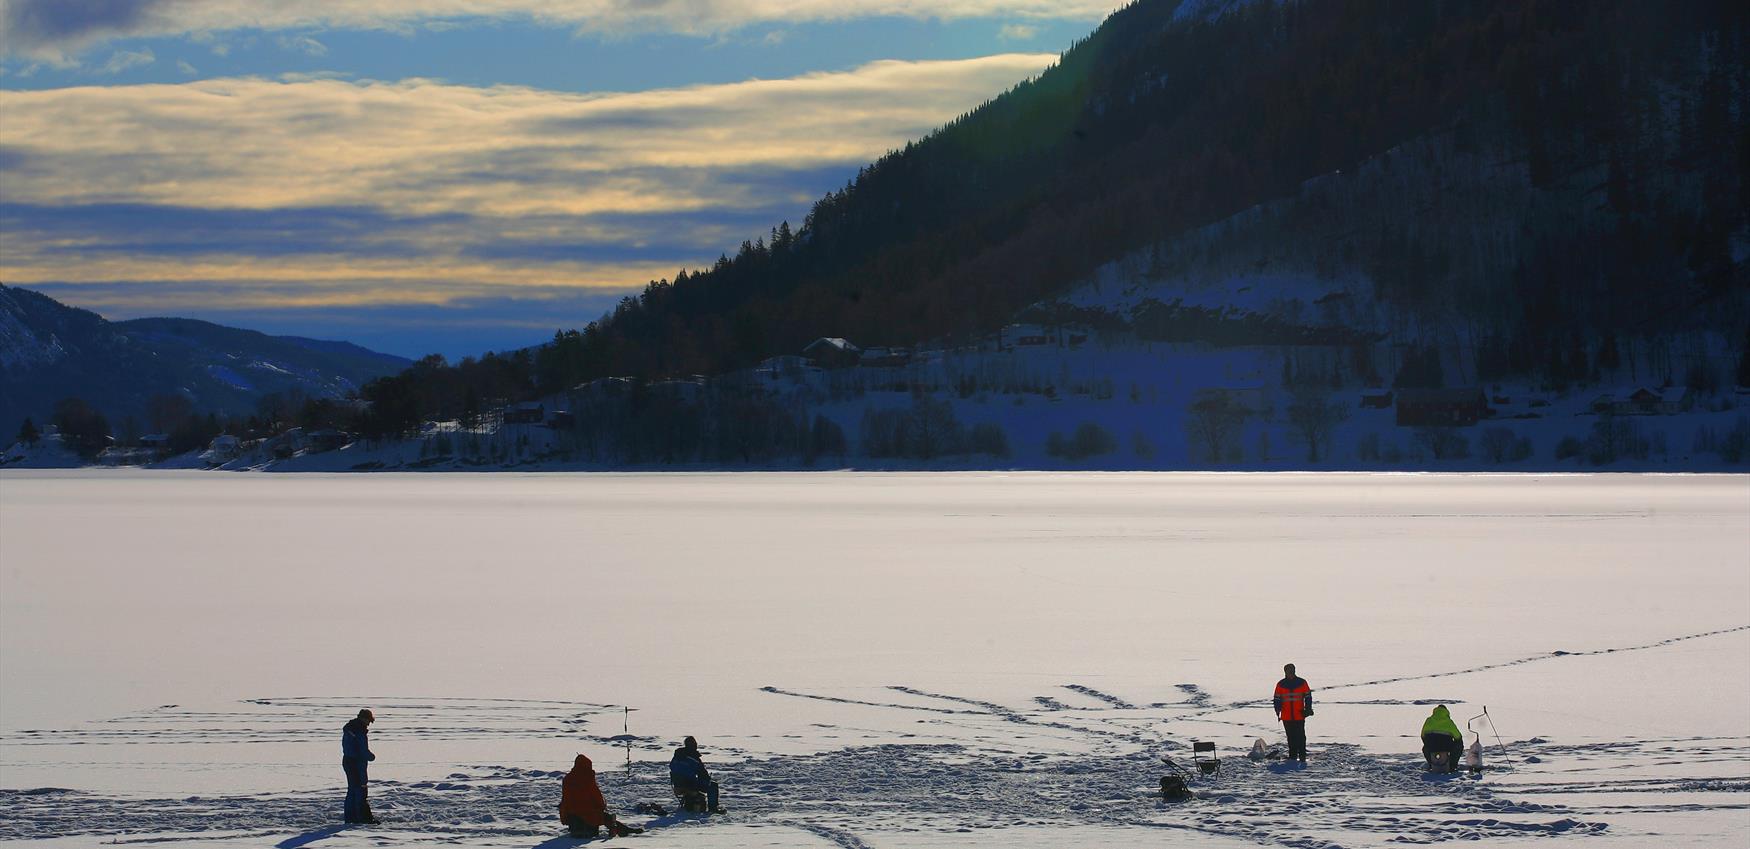 Rjukan has some nice lakes for ice fishing. Møsvatn is famous for its ice fishing conditions.